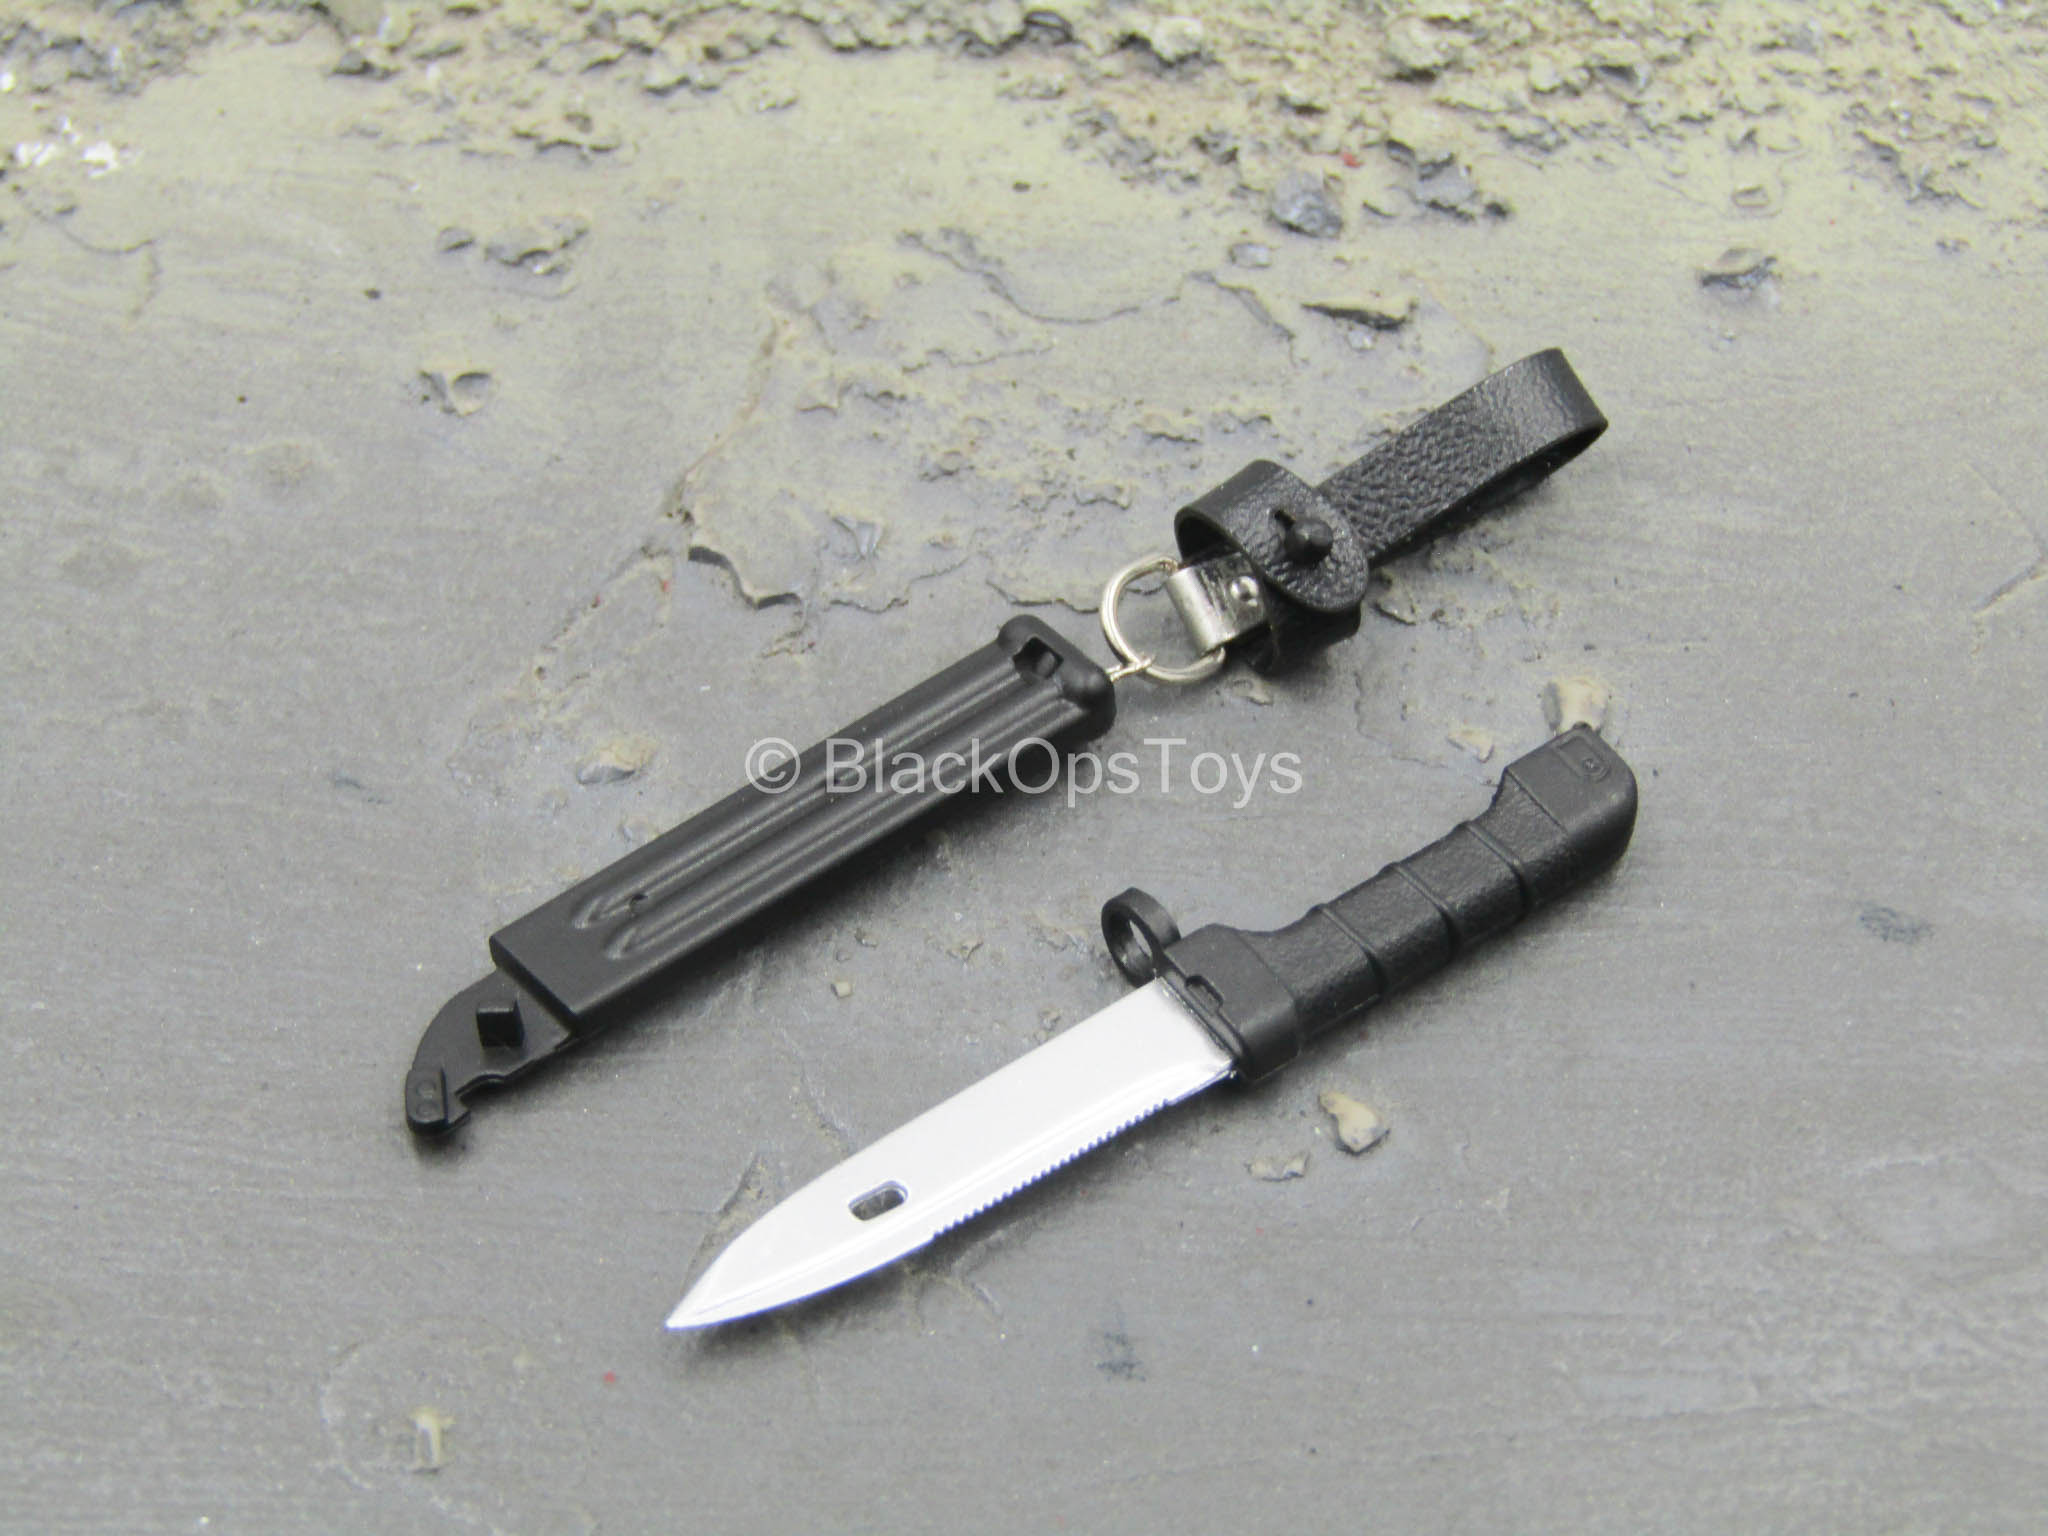 what is the function of the ak 47 bayonet sheath